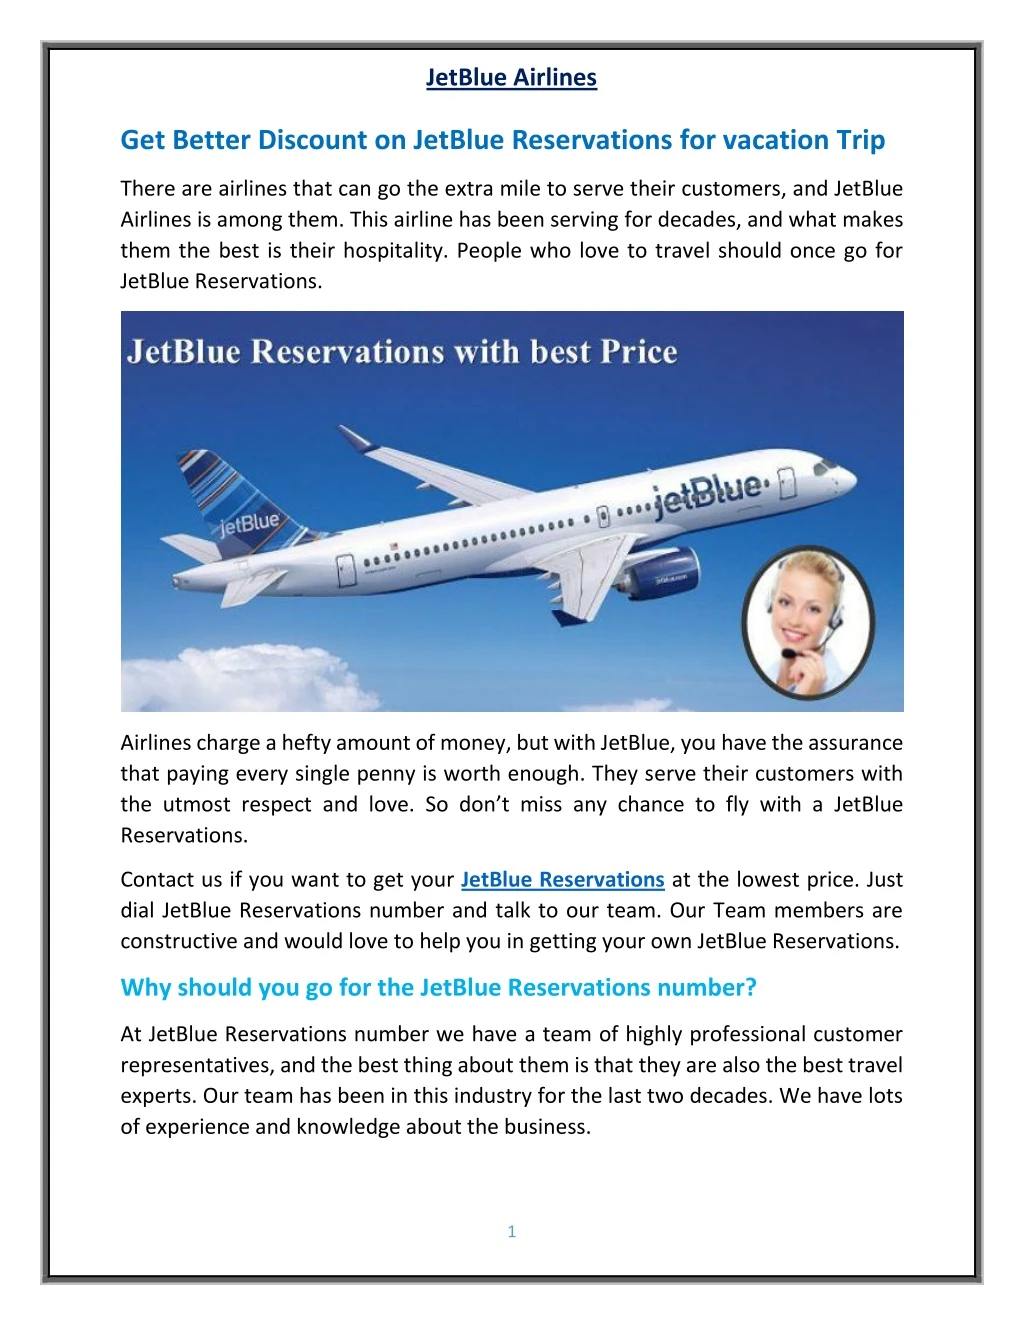 jetblue airlines